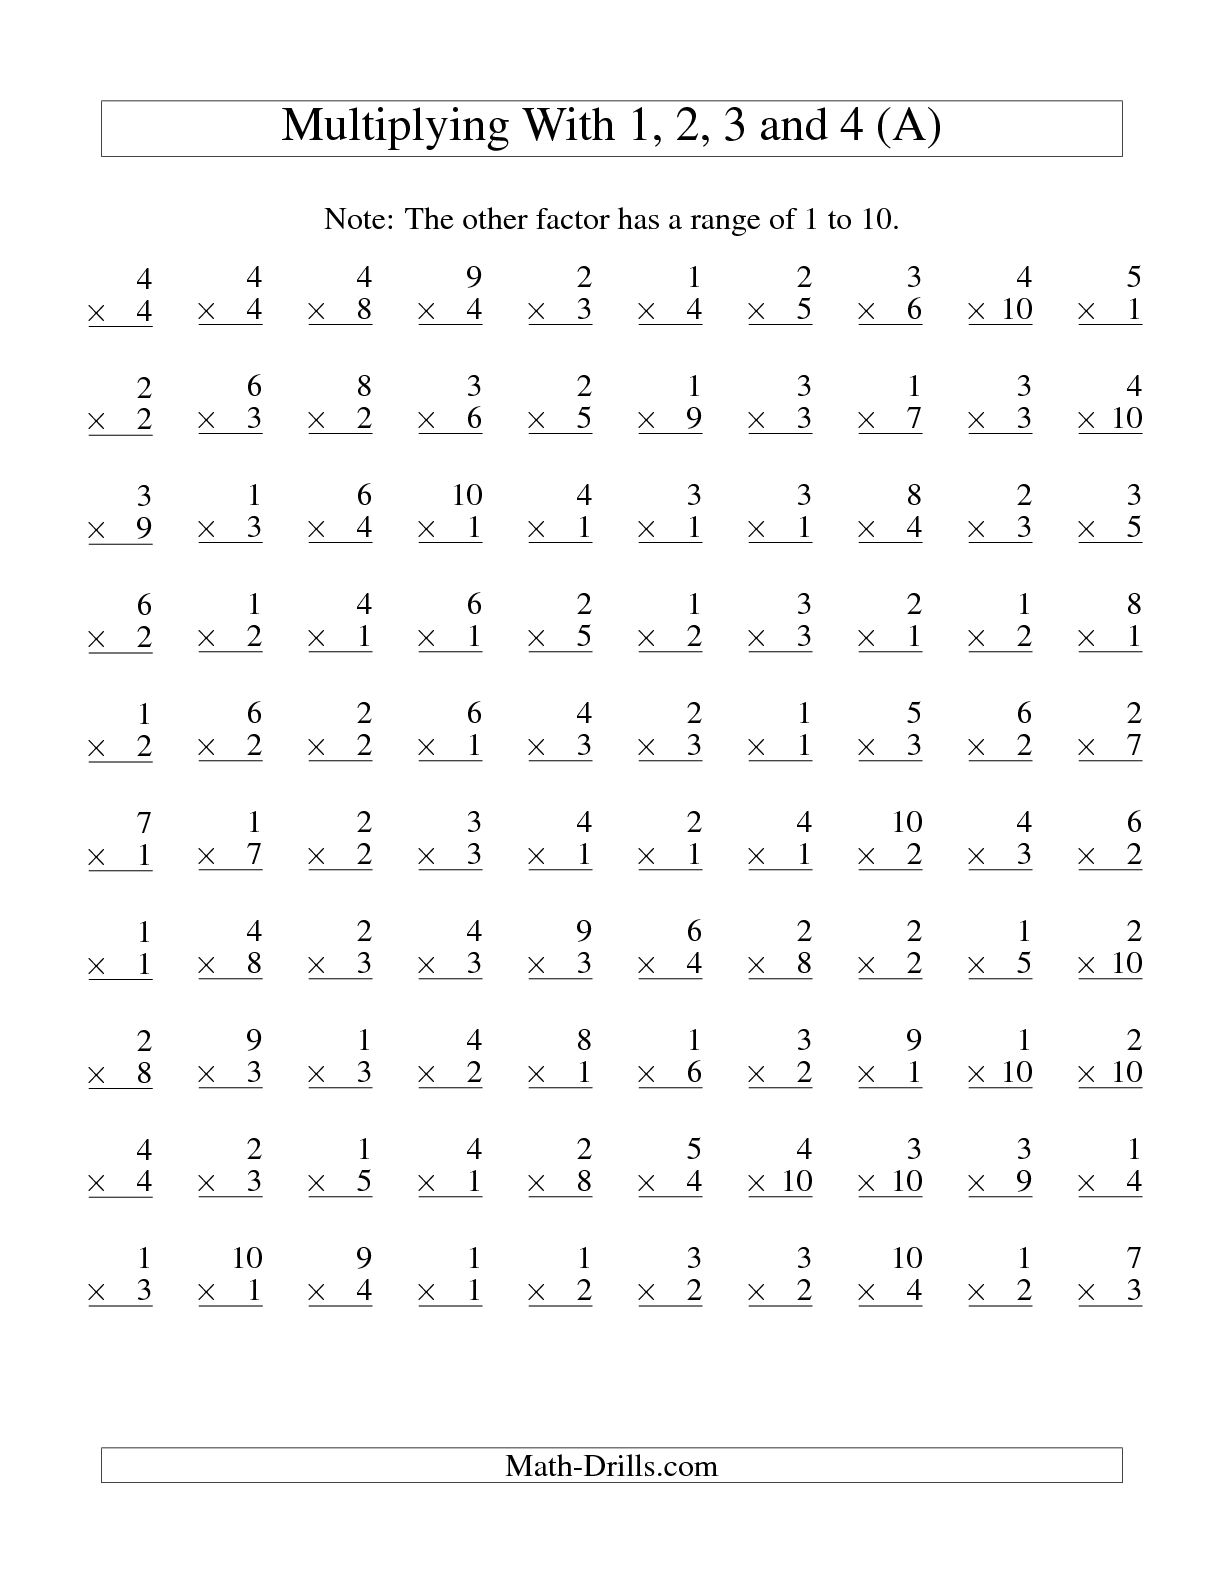 mixed-multiplication-facts-0-9-horizontal-worksheets-and-exercise